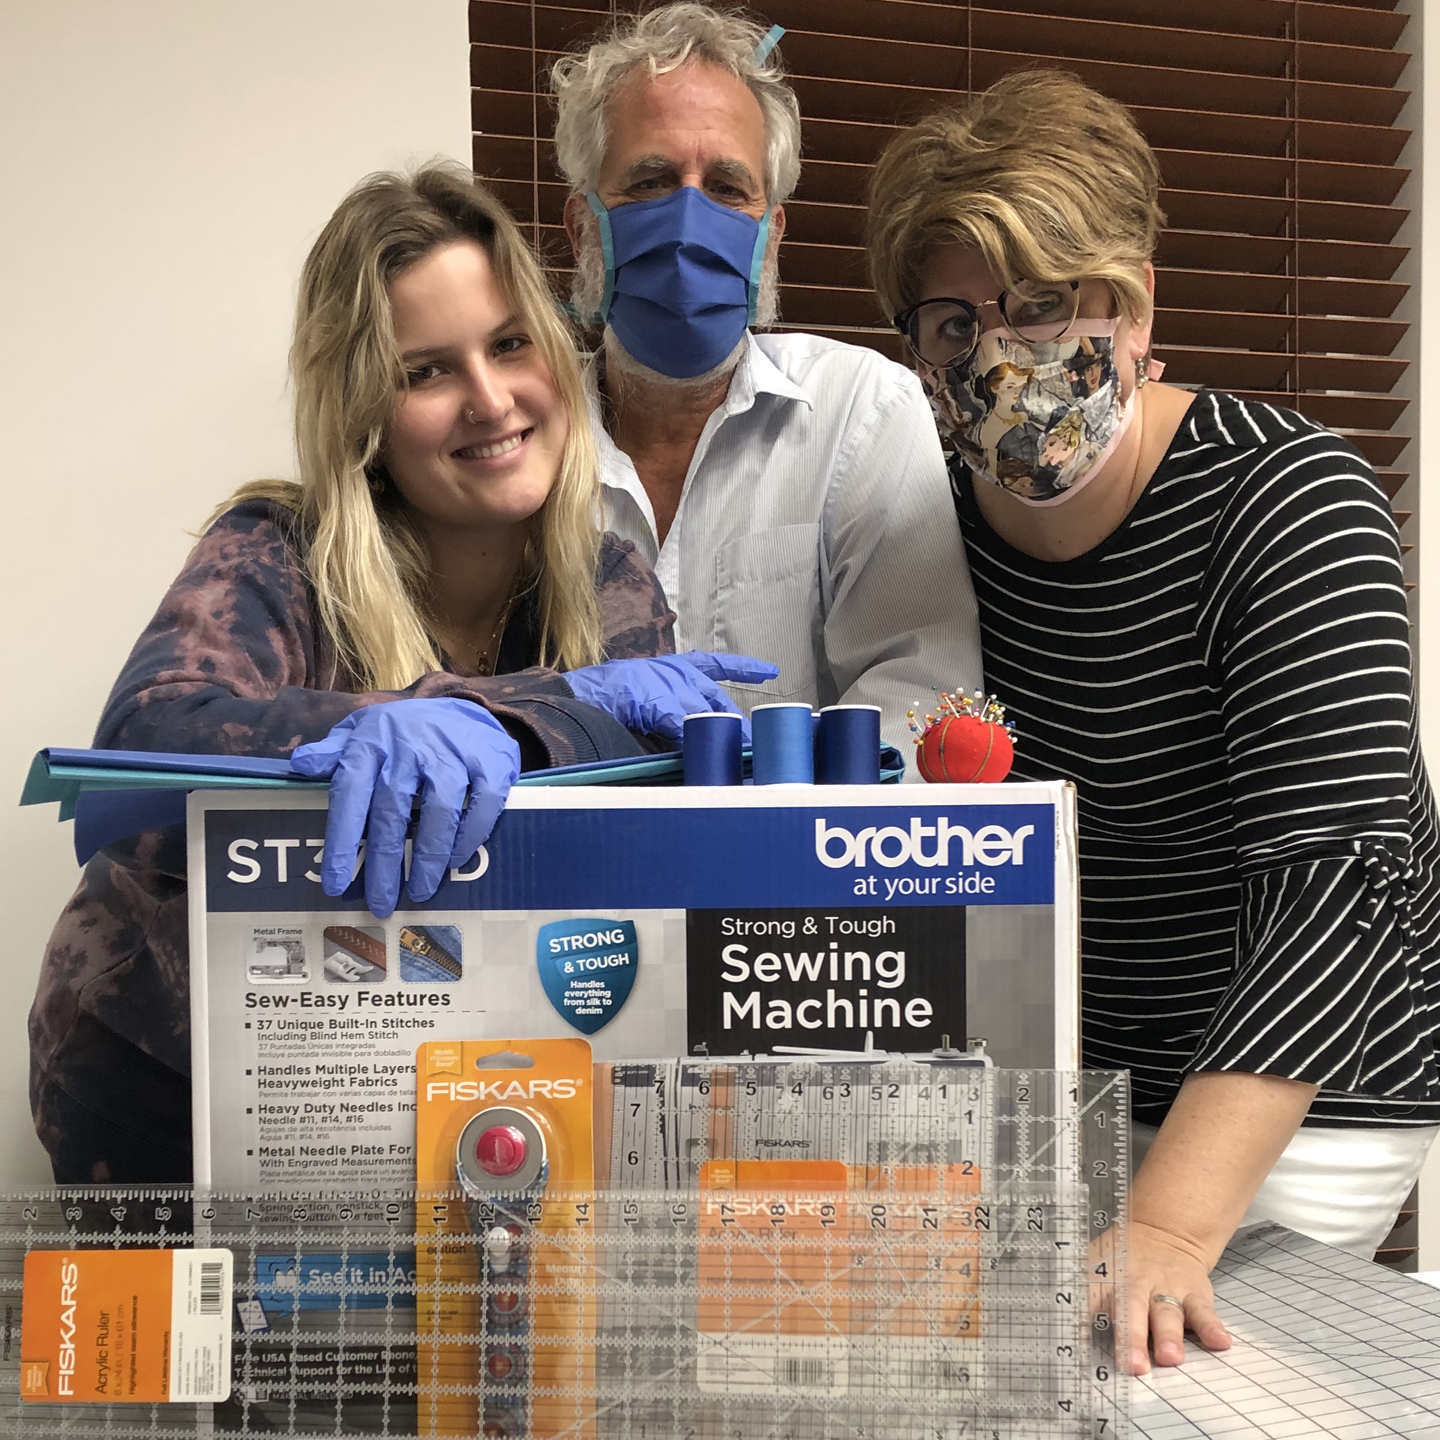 A photo of Annika Heetderks wearing blue surgical gloves, a man in a blue mask, and a woman in a patterned mask, standing in front of a boxed sewing machine